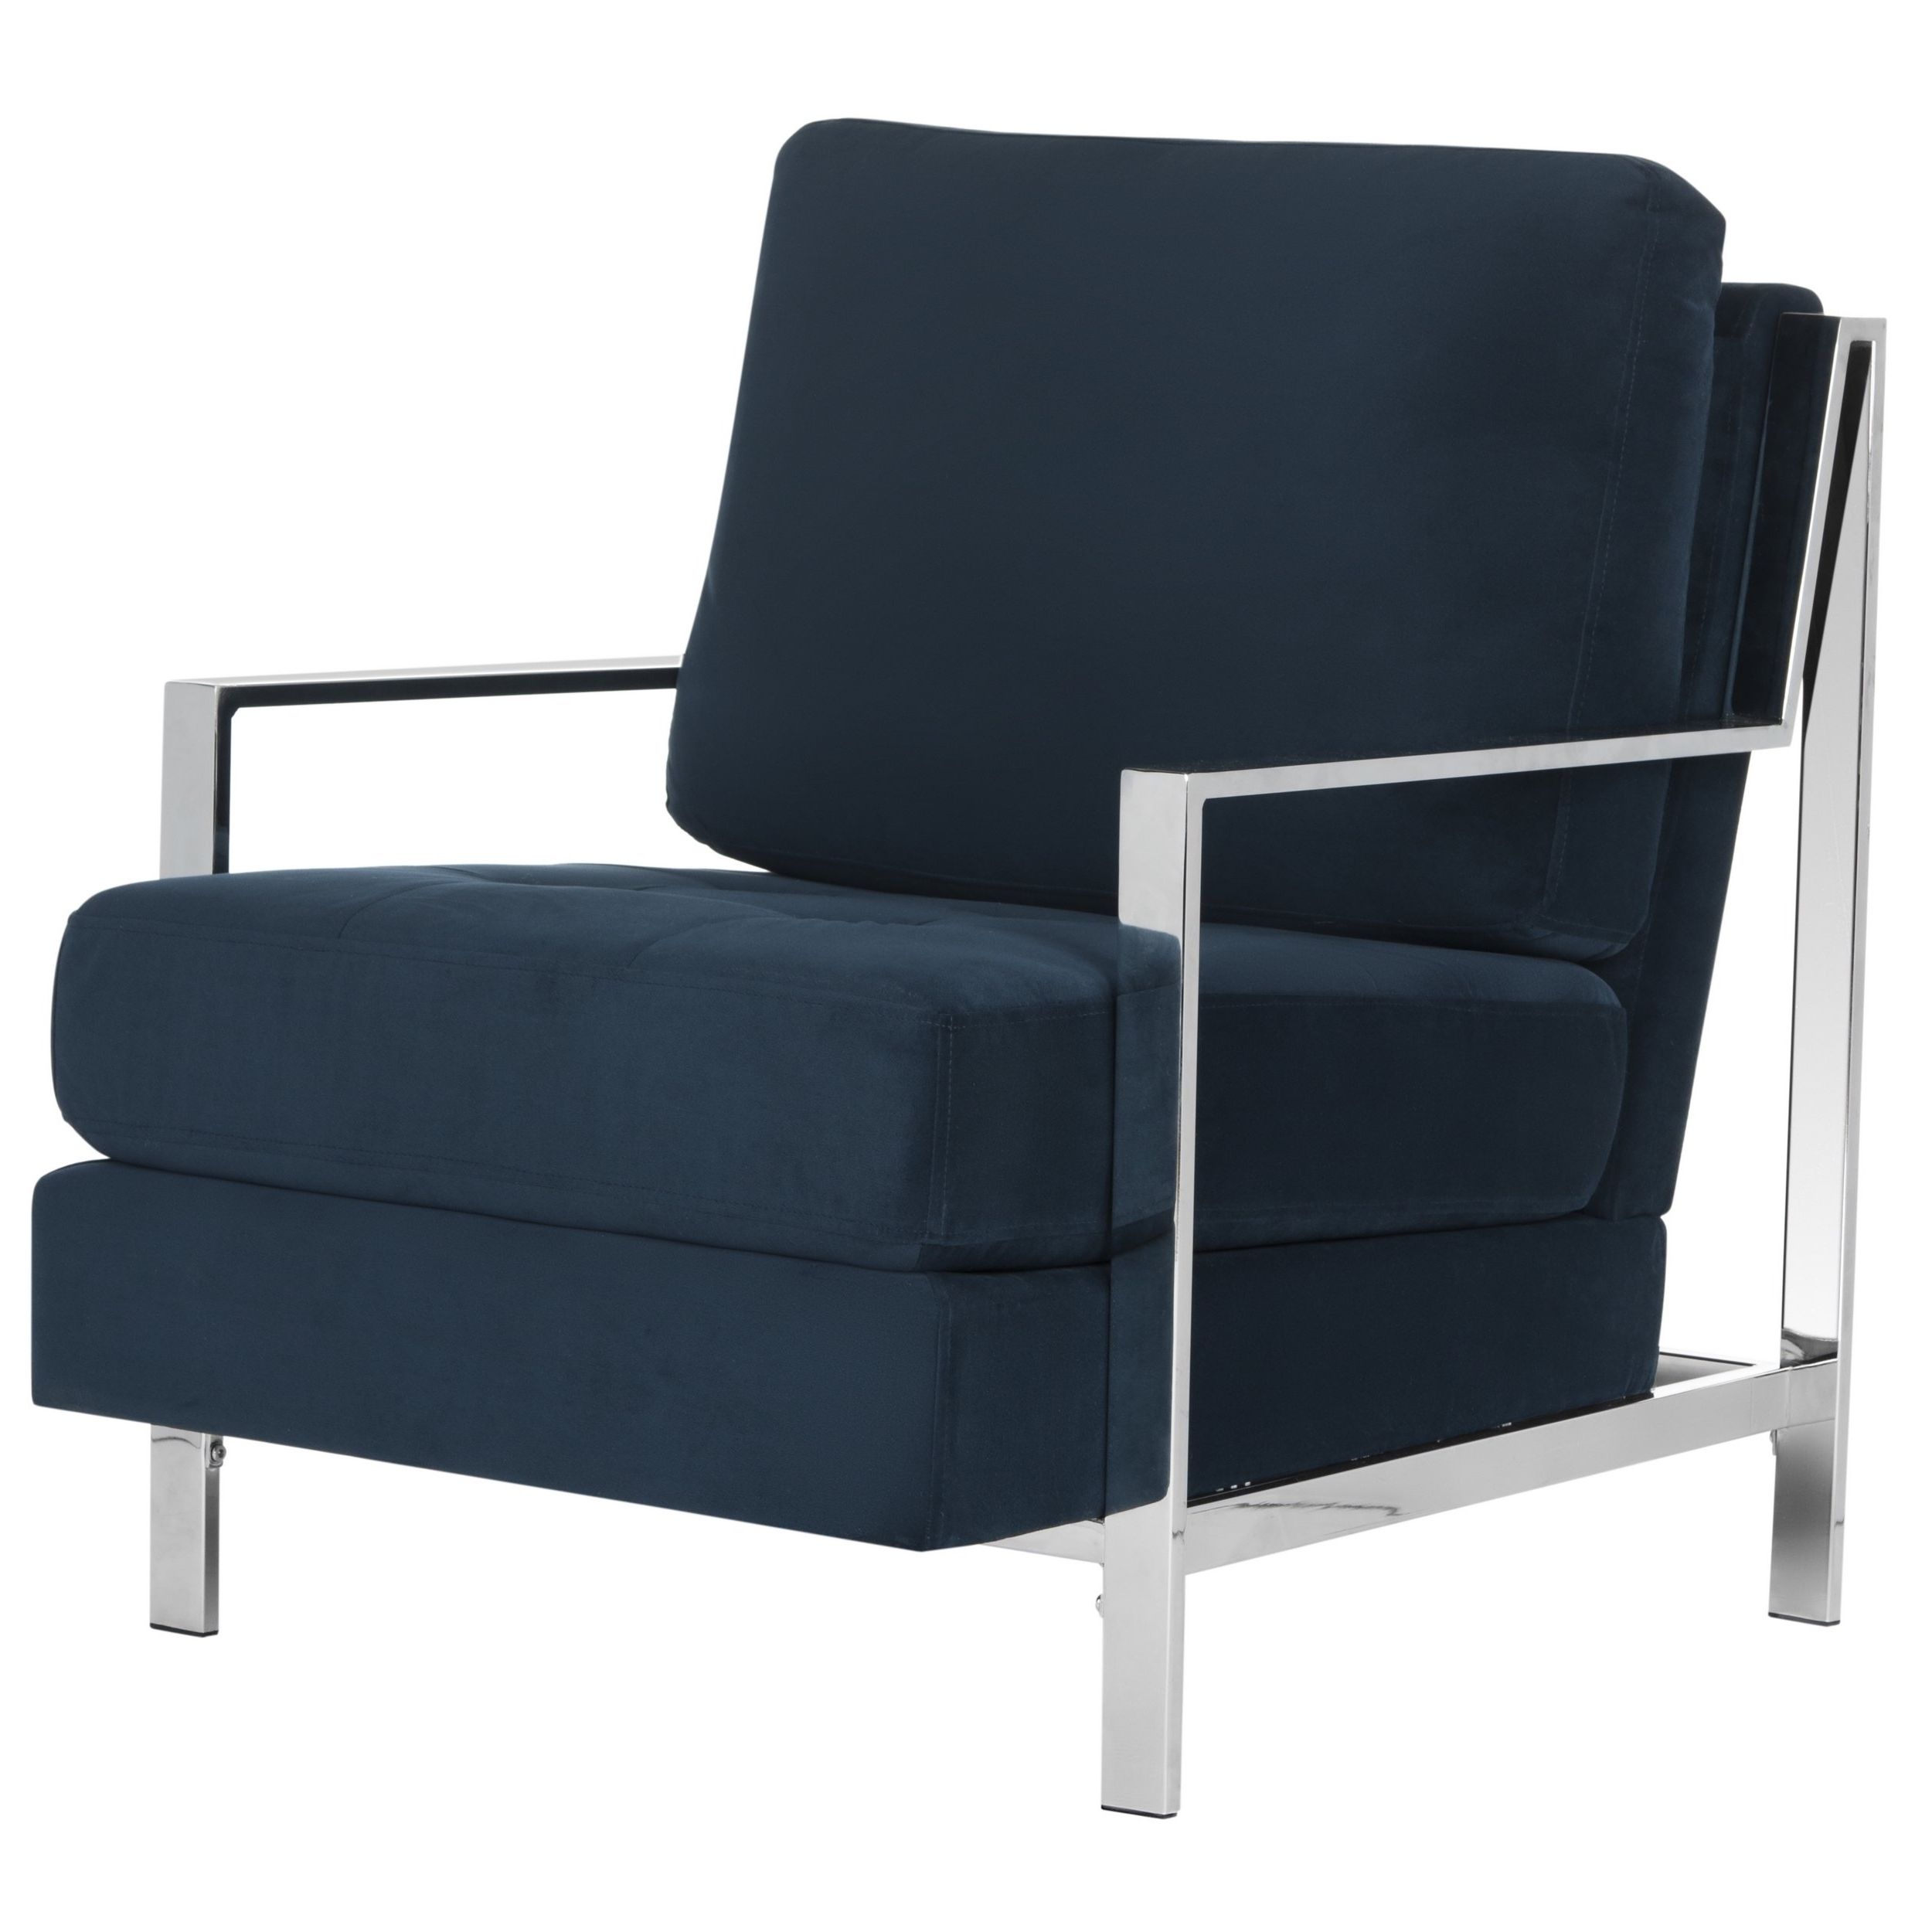 Well Liked Walden Upholstered Side Chairs Intended For Shop Mid Century Modern Glam Velvet Navy Blue Club Chair – Free (View 5 of 20)